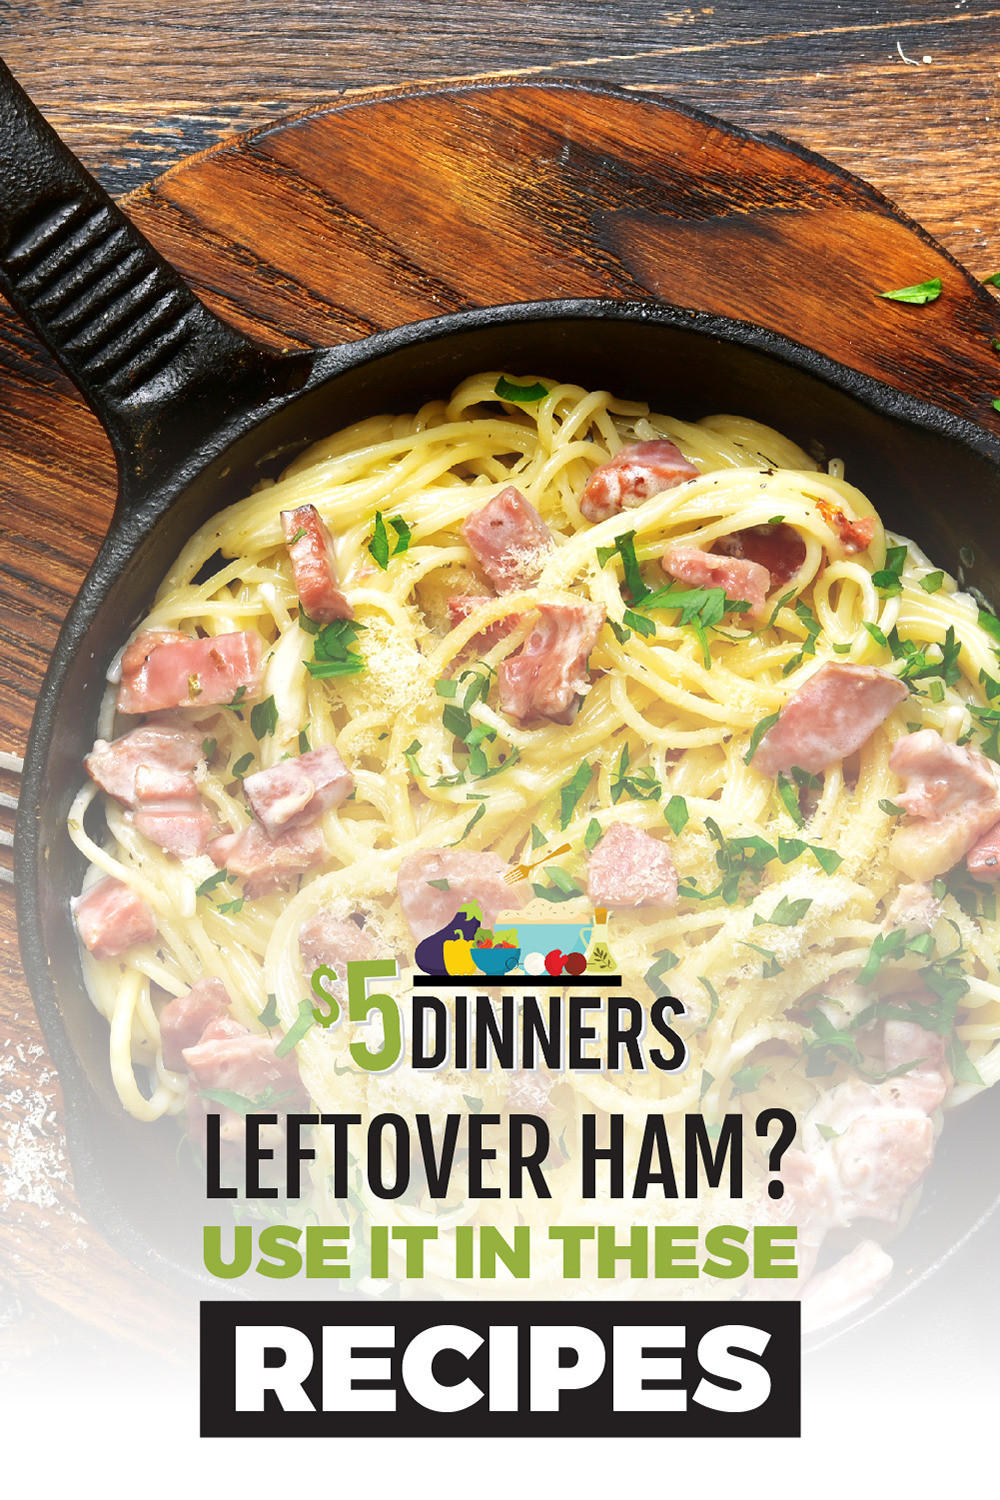 Leftover Easter Ham Recipe
 17 Recipes That Call for Leftover Easter Ham $5 Dinners